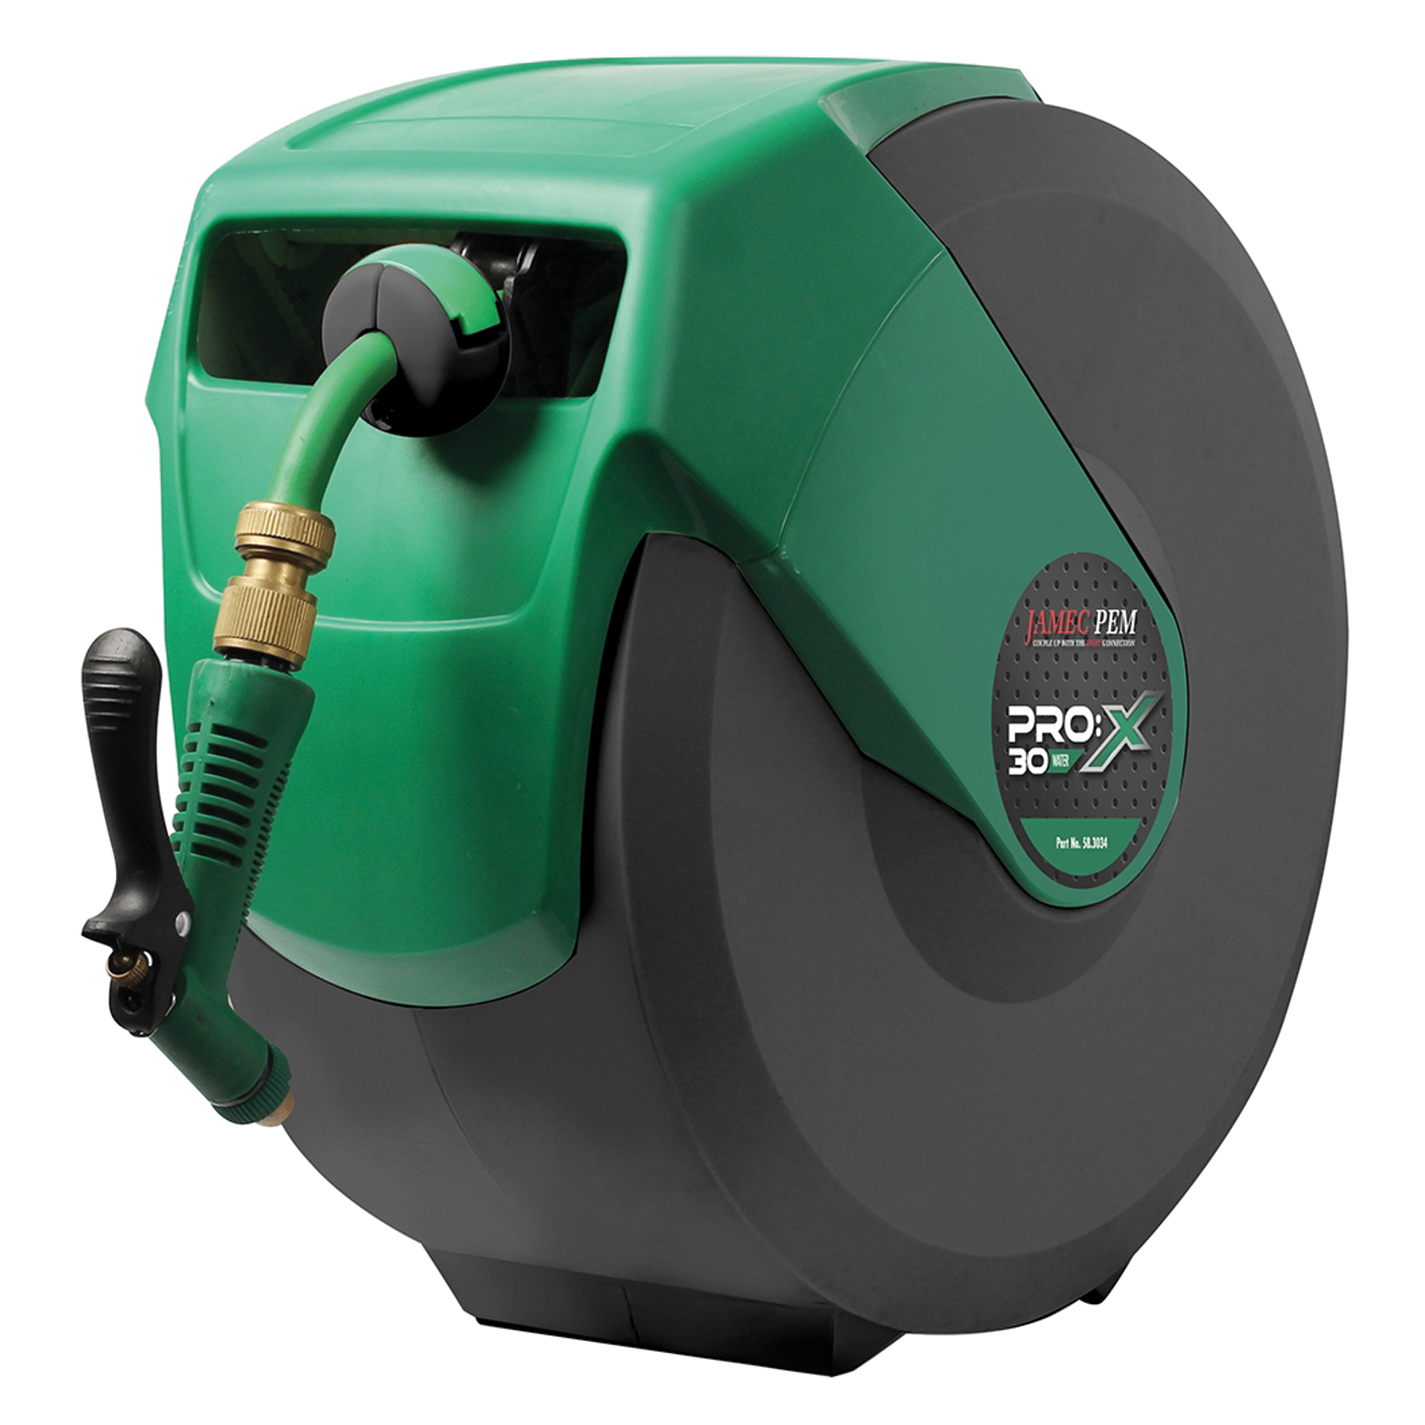 Havy Duty Water Hose Reel comes with Hose